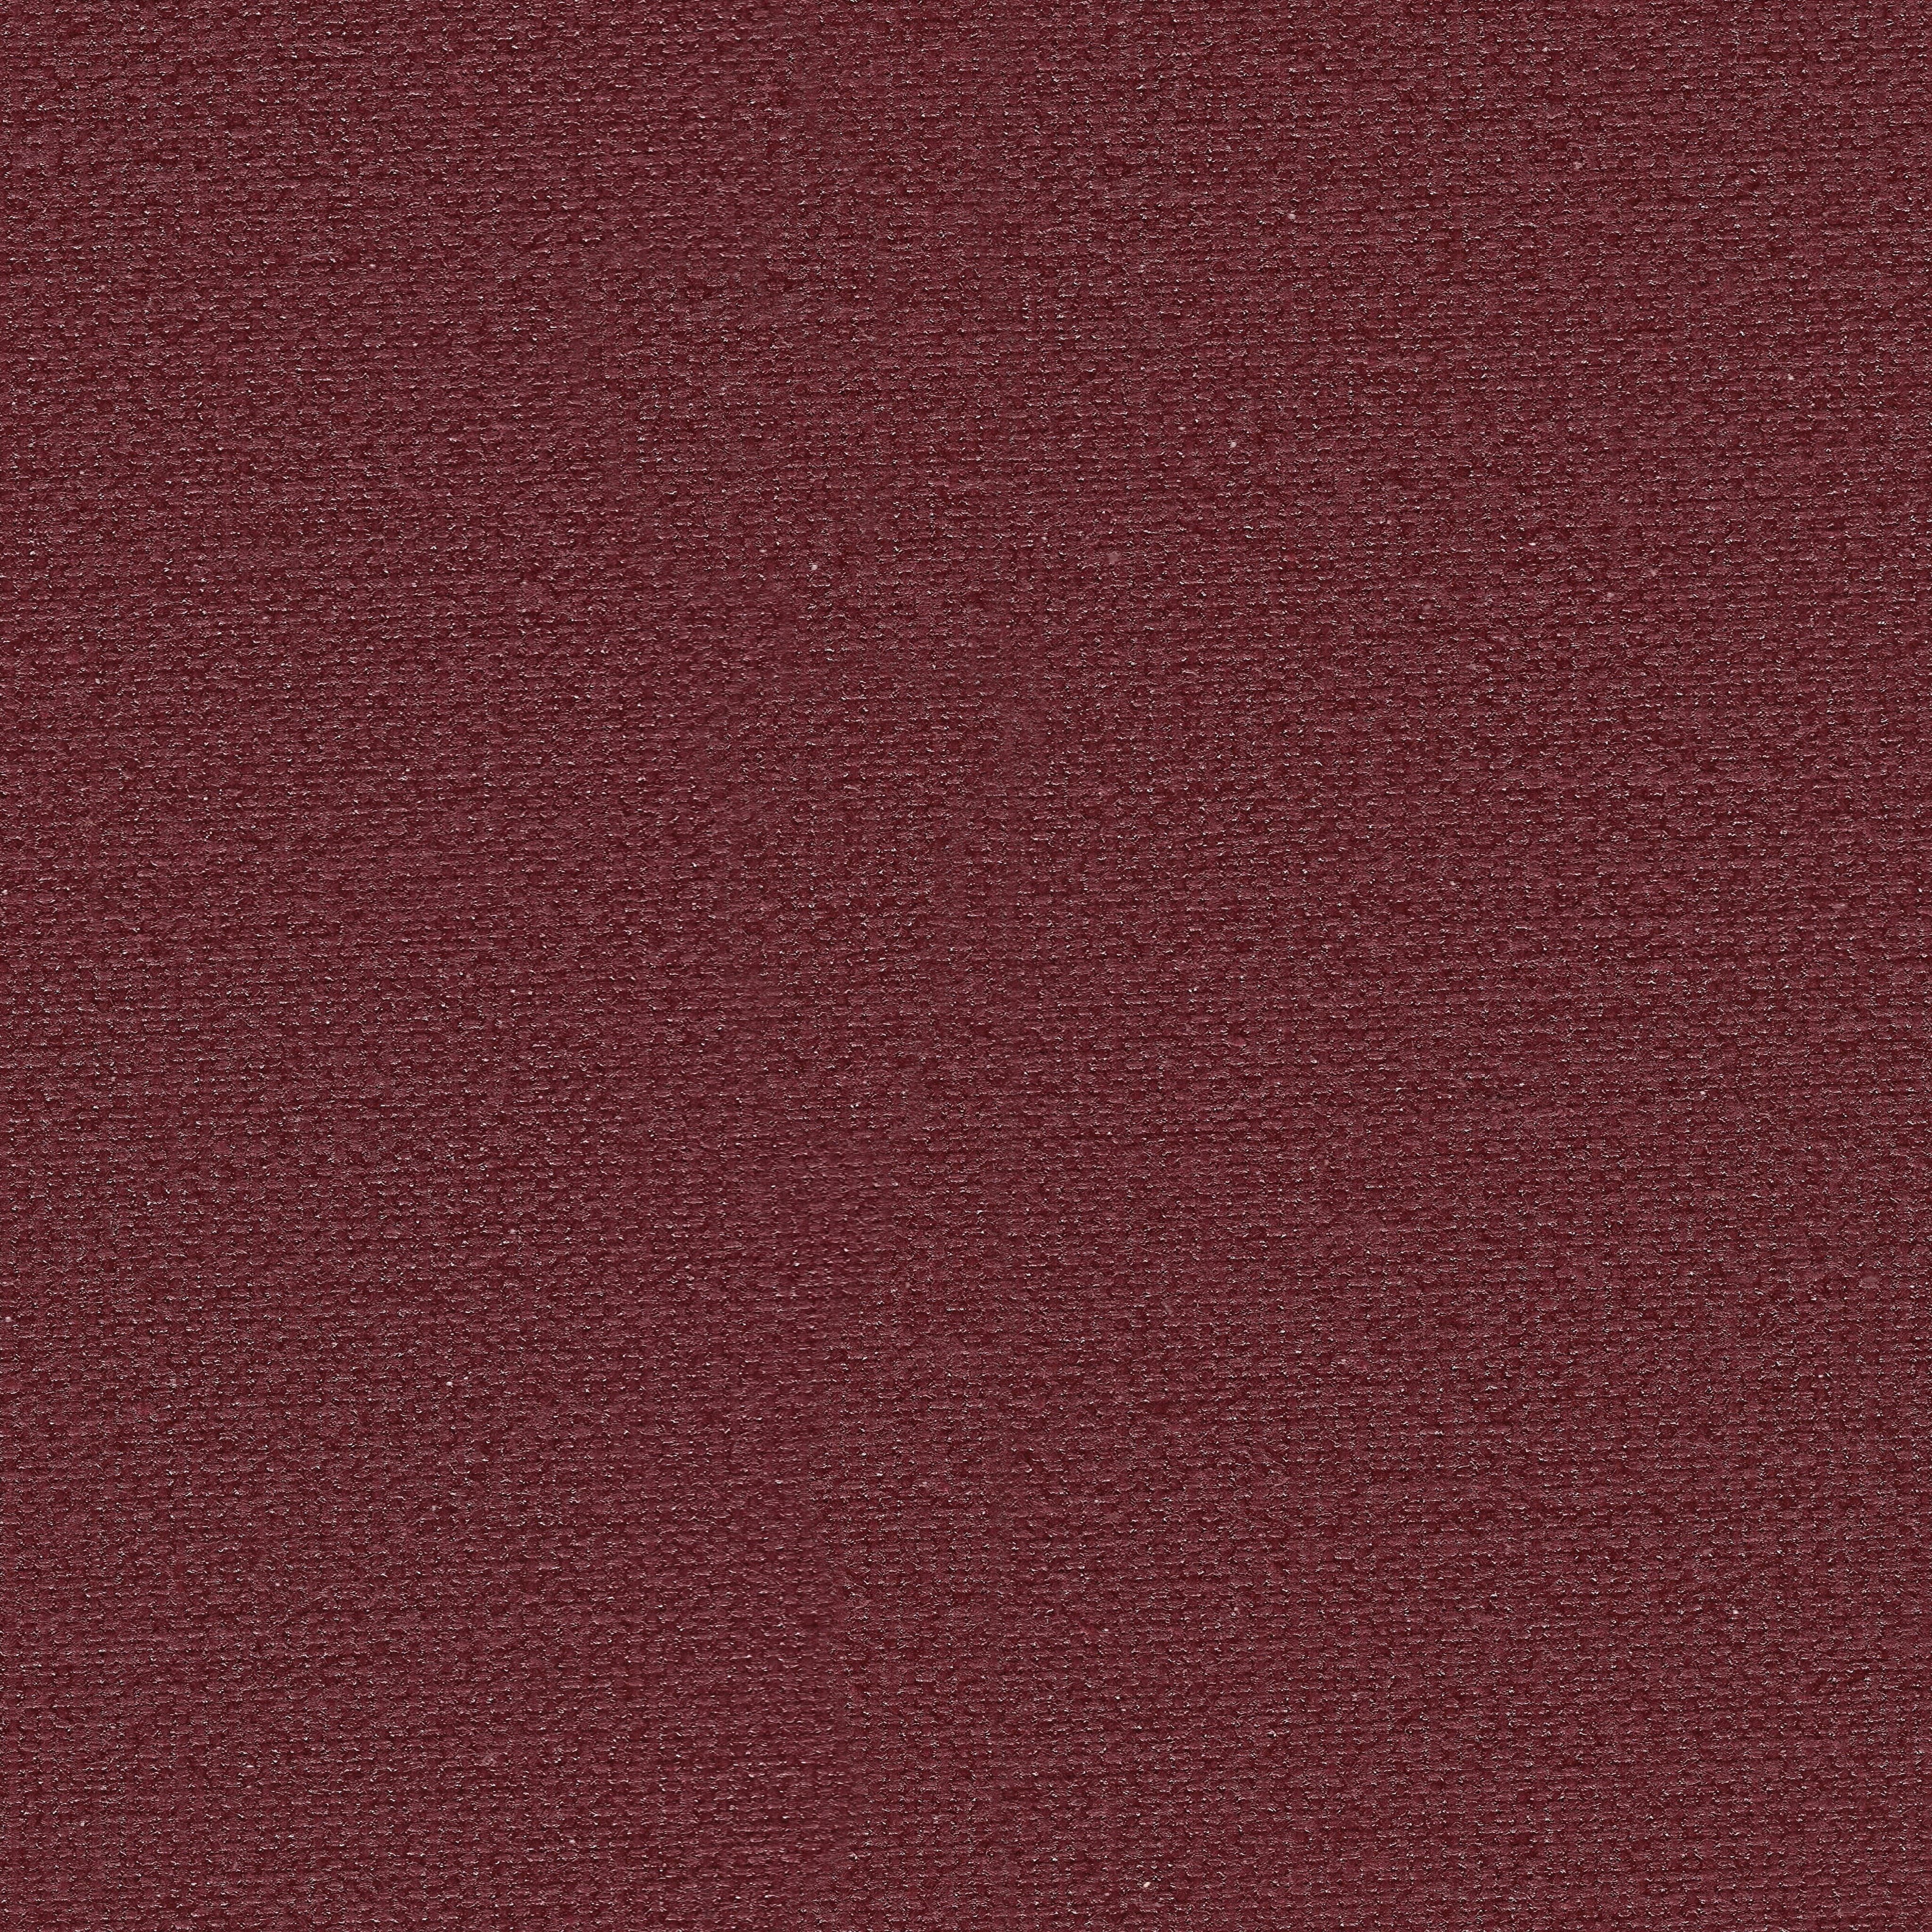 seamless, texture, tileable, book, hard cover, seamless texture